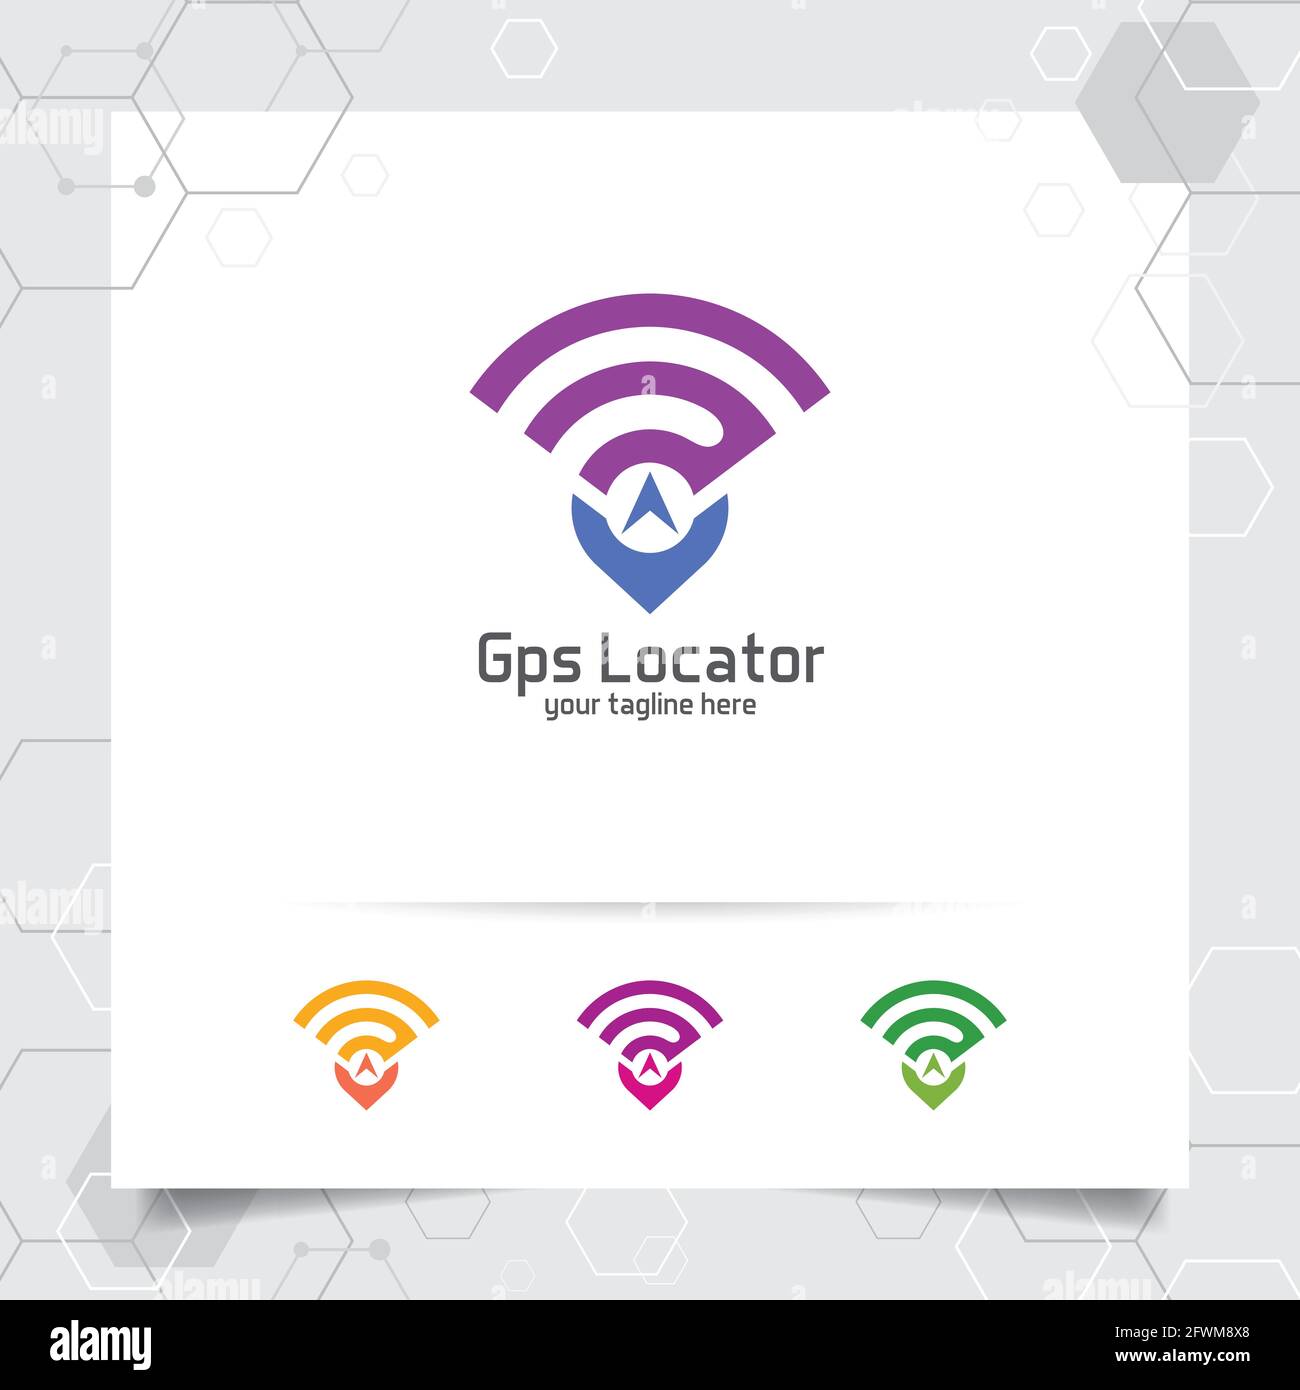 City locate logo vector with concept of pin map locator and gps signal symbol design for travel, local guide, gps, and tour. Stock Vector